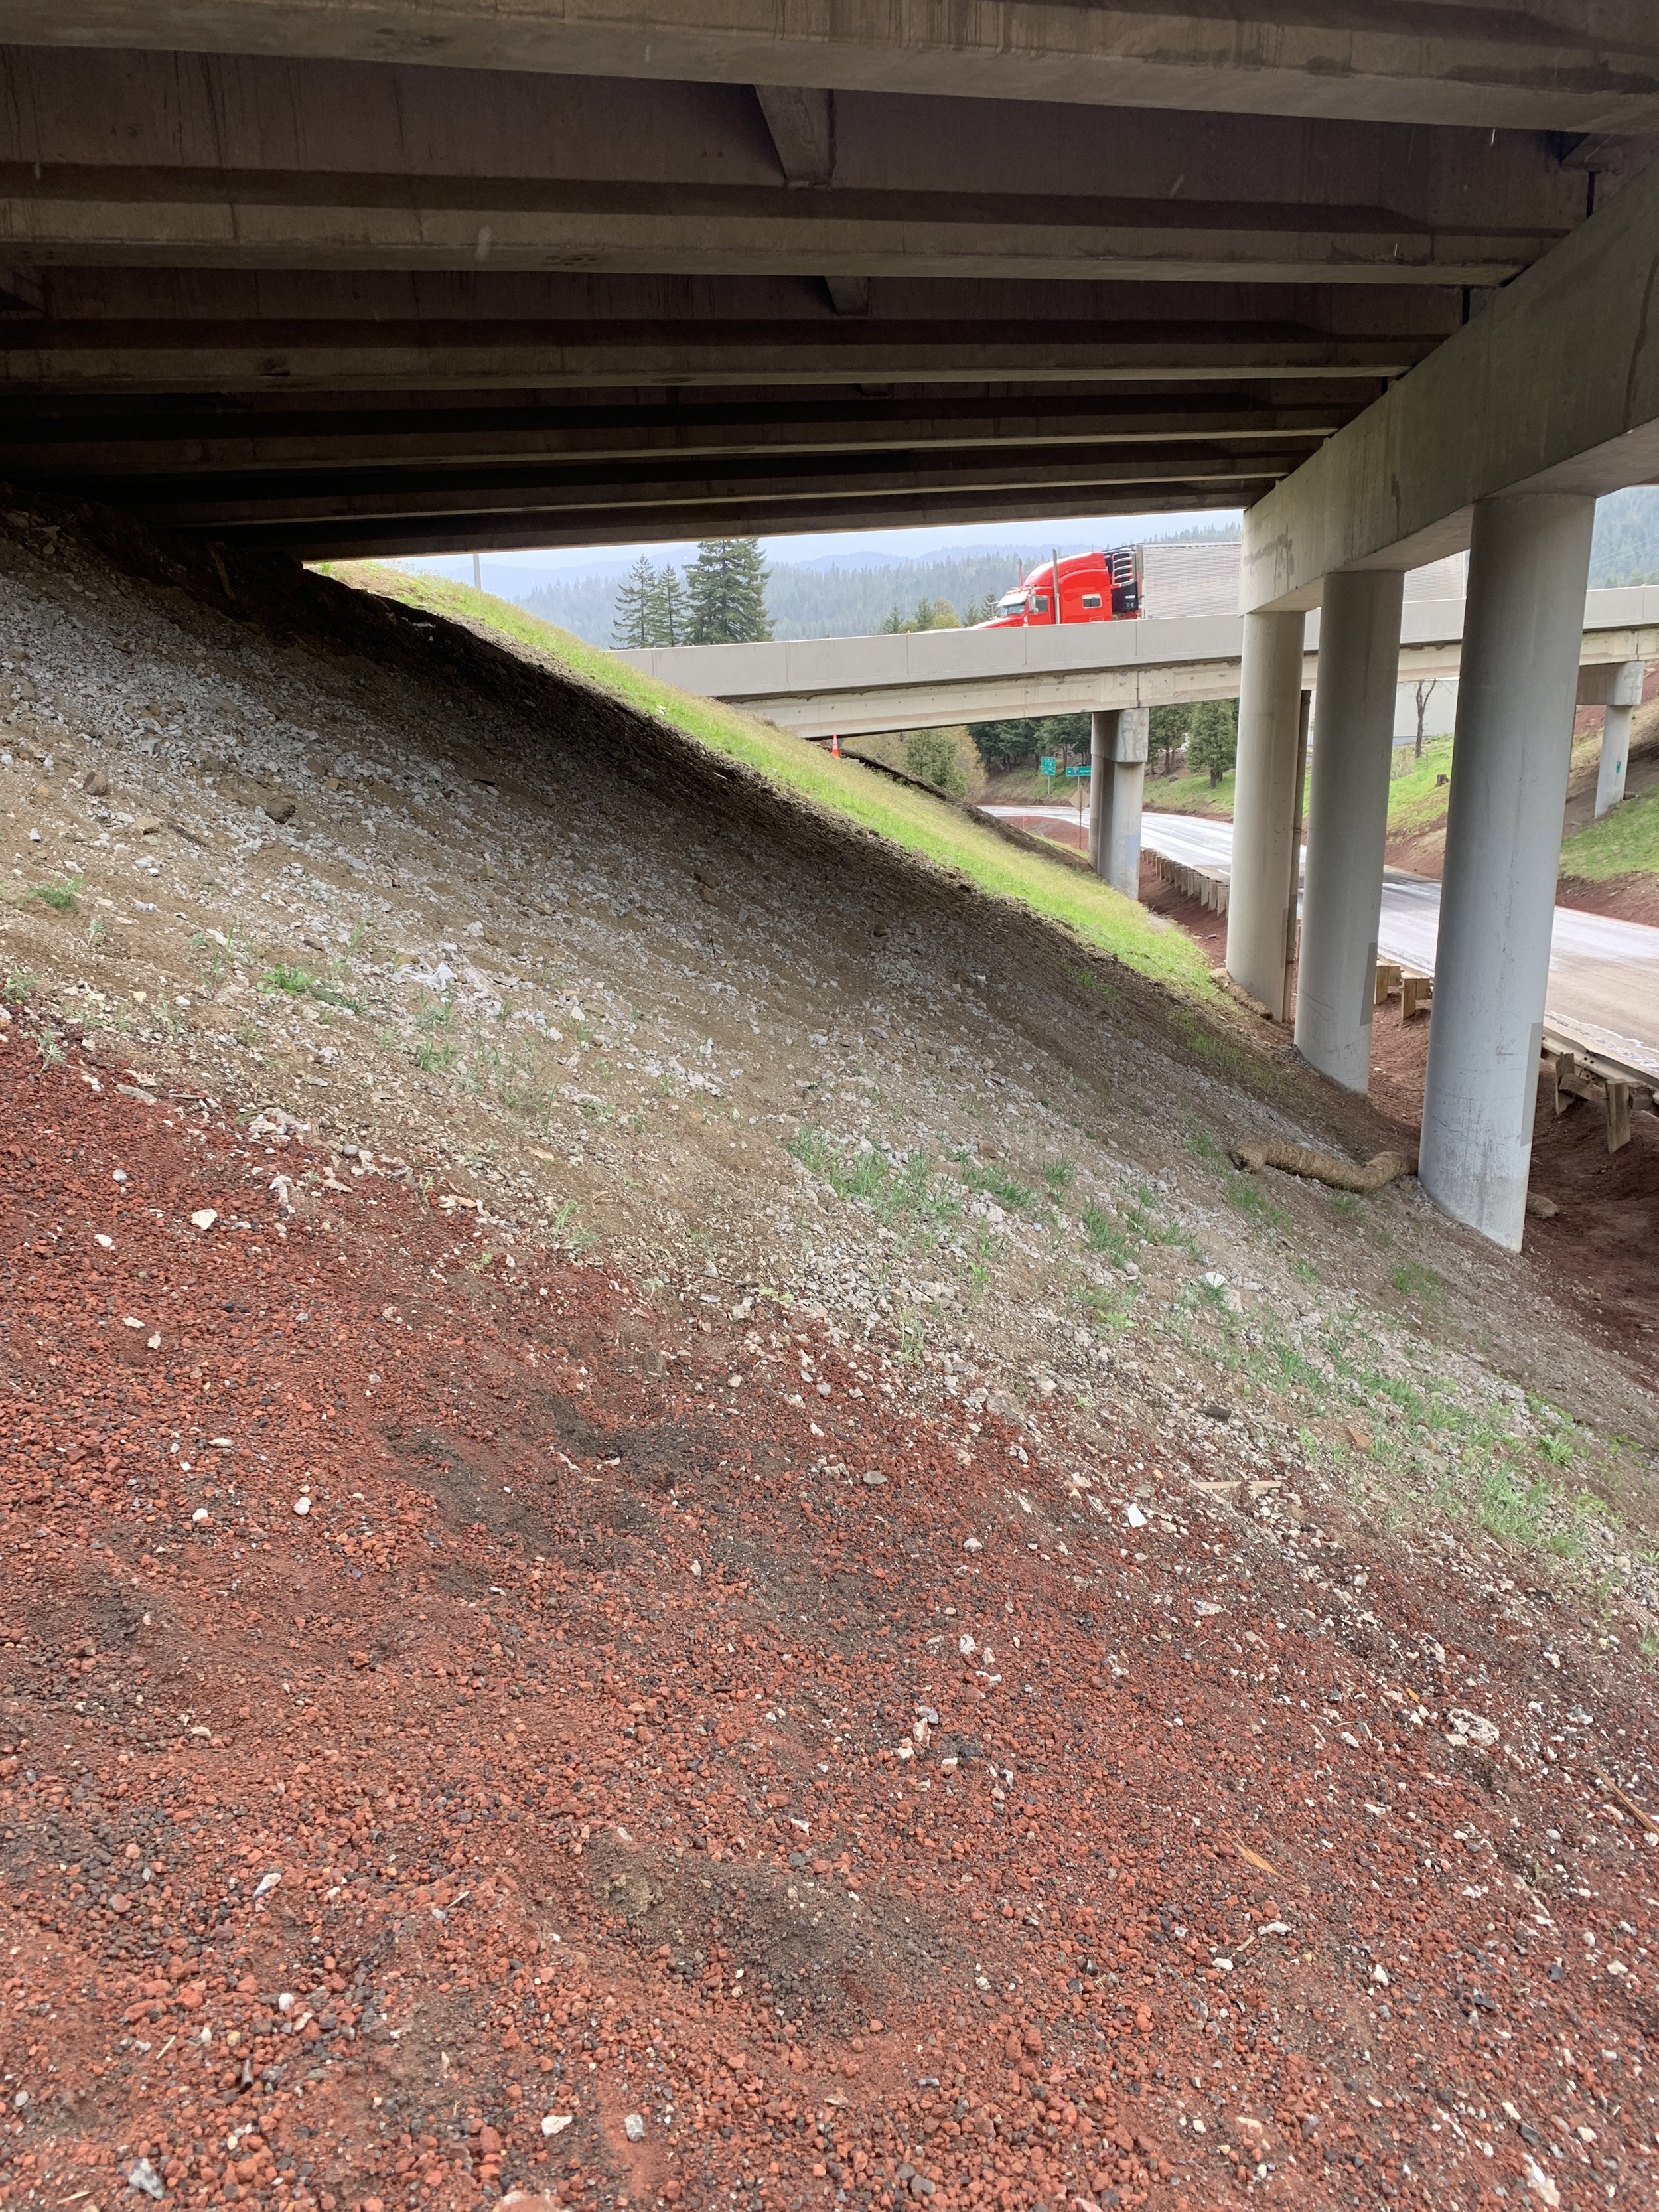  Existing underpasses on I-5, south of Ashland showed signs of wildlife use. Can you spot the faint trail running beneath the bridge? 